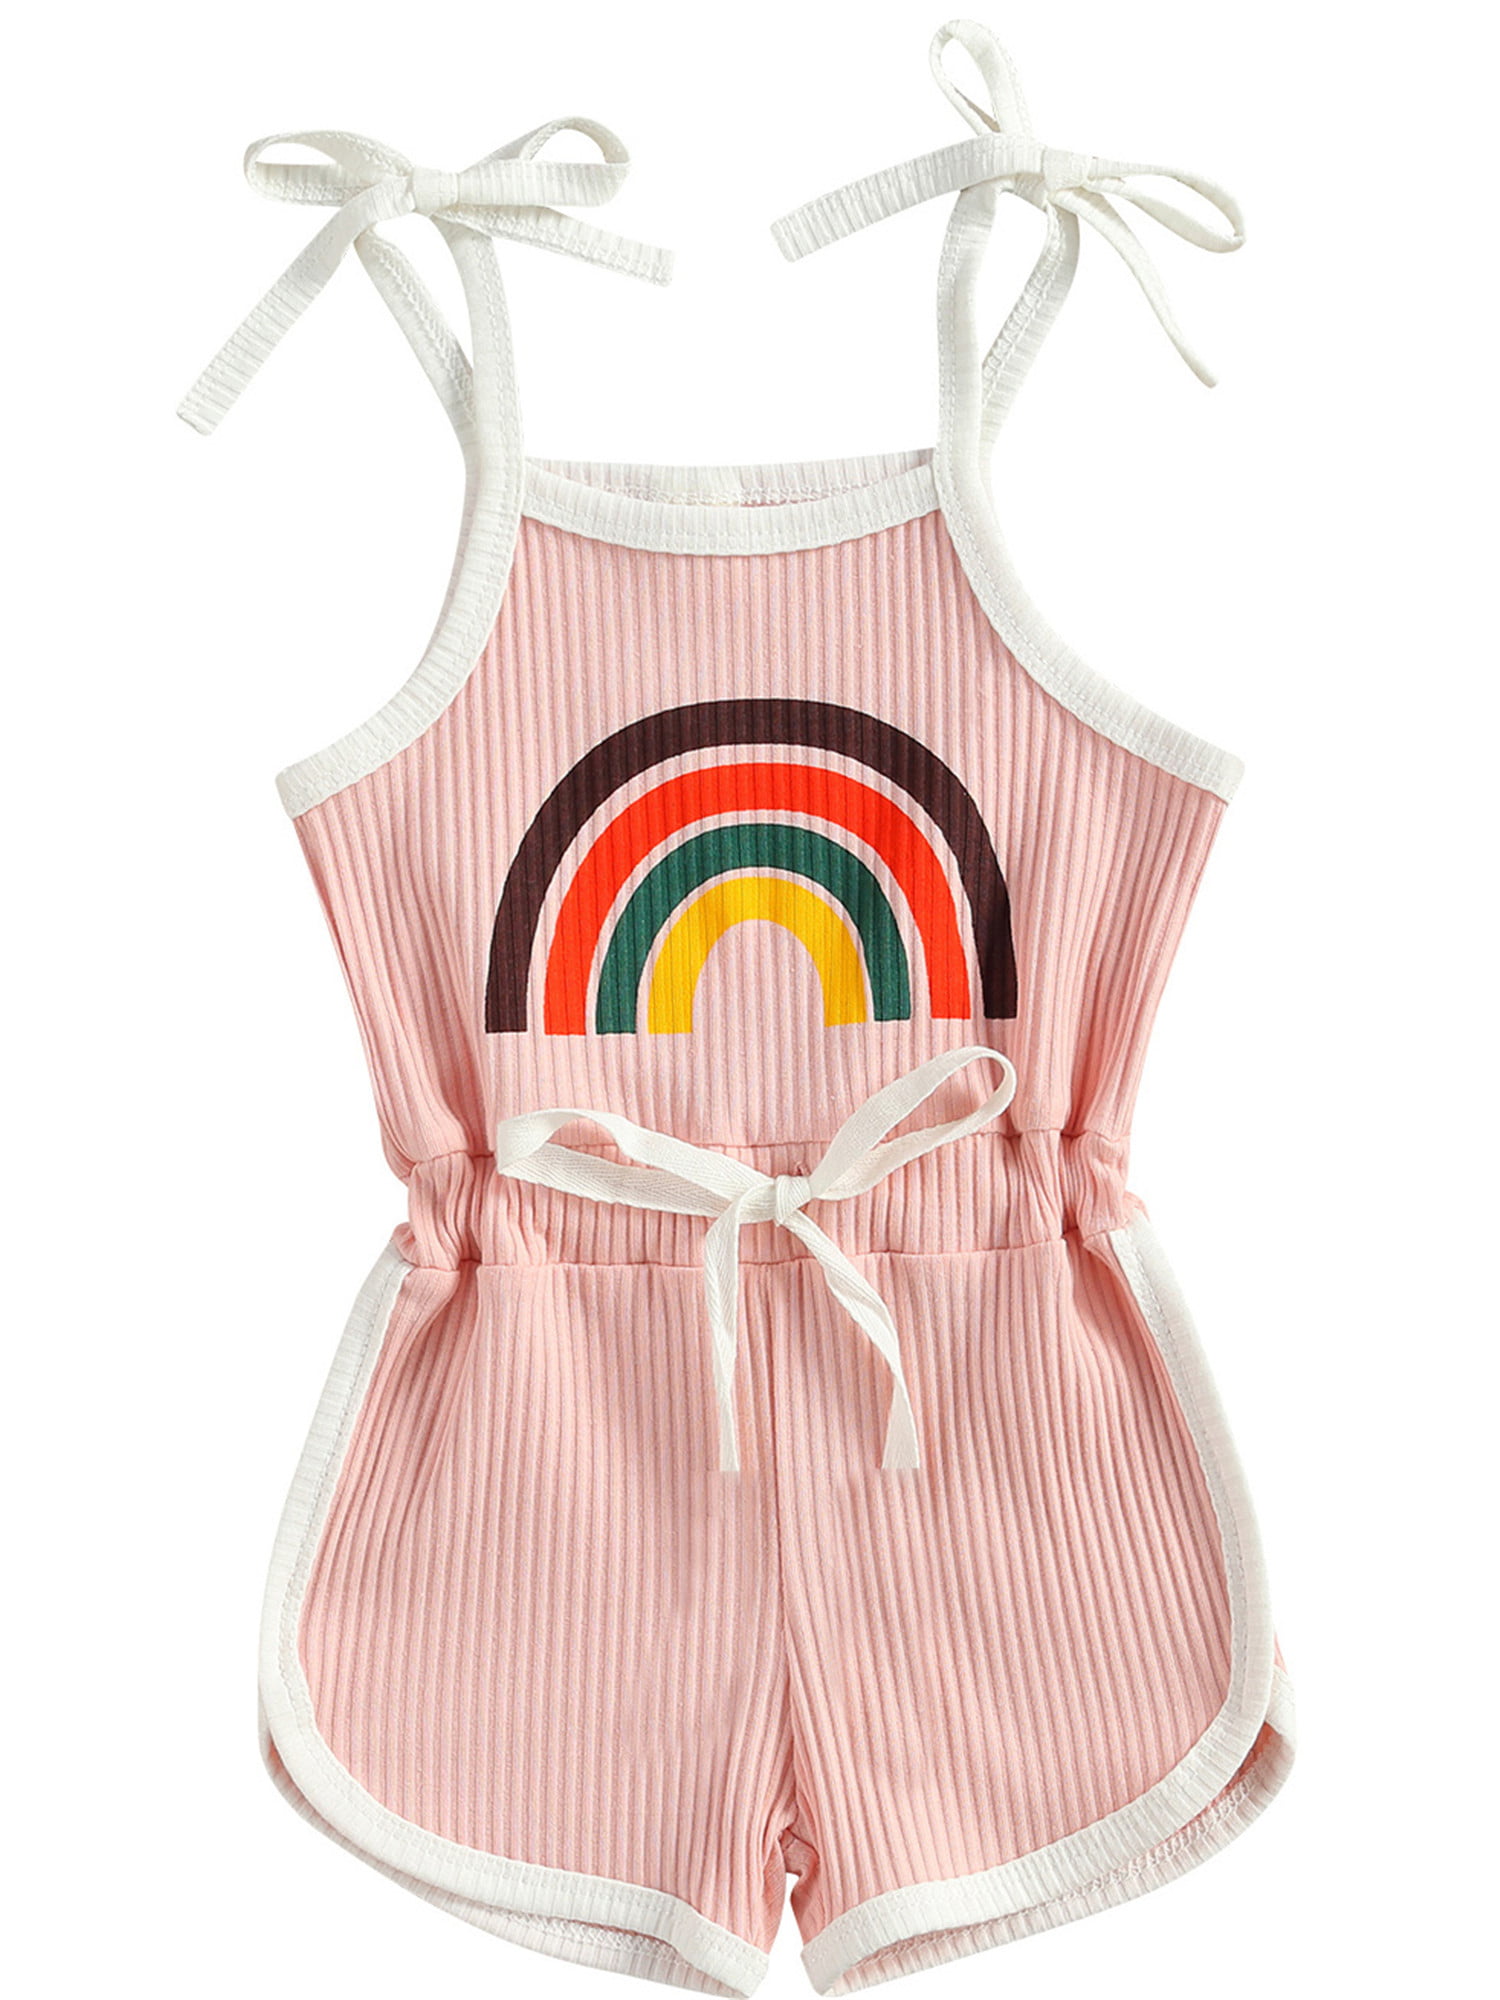 Toddler Baby Girl Knit Ribbed Romper Halter Solid Rainbow Short Jumpsuit Summer One Piece Playsuit Outfits